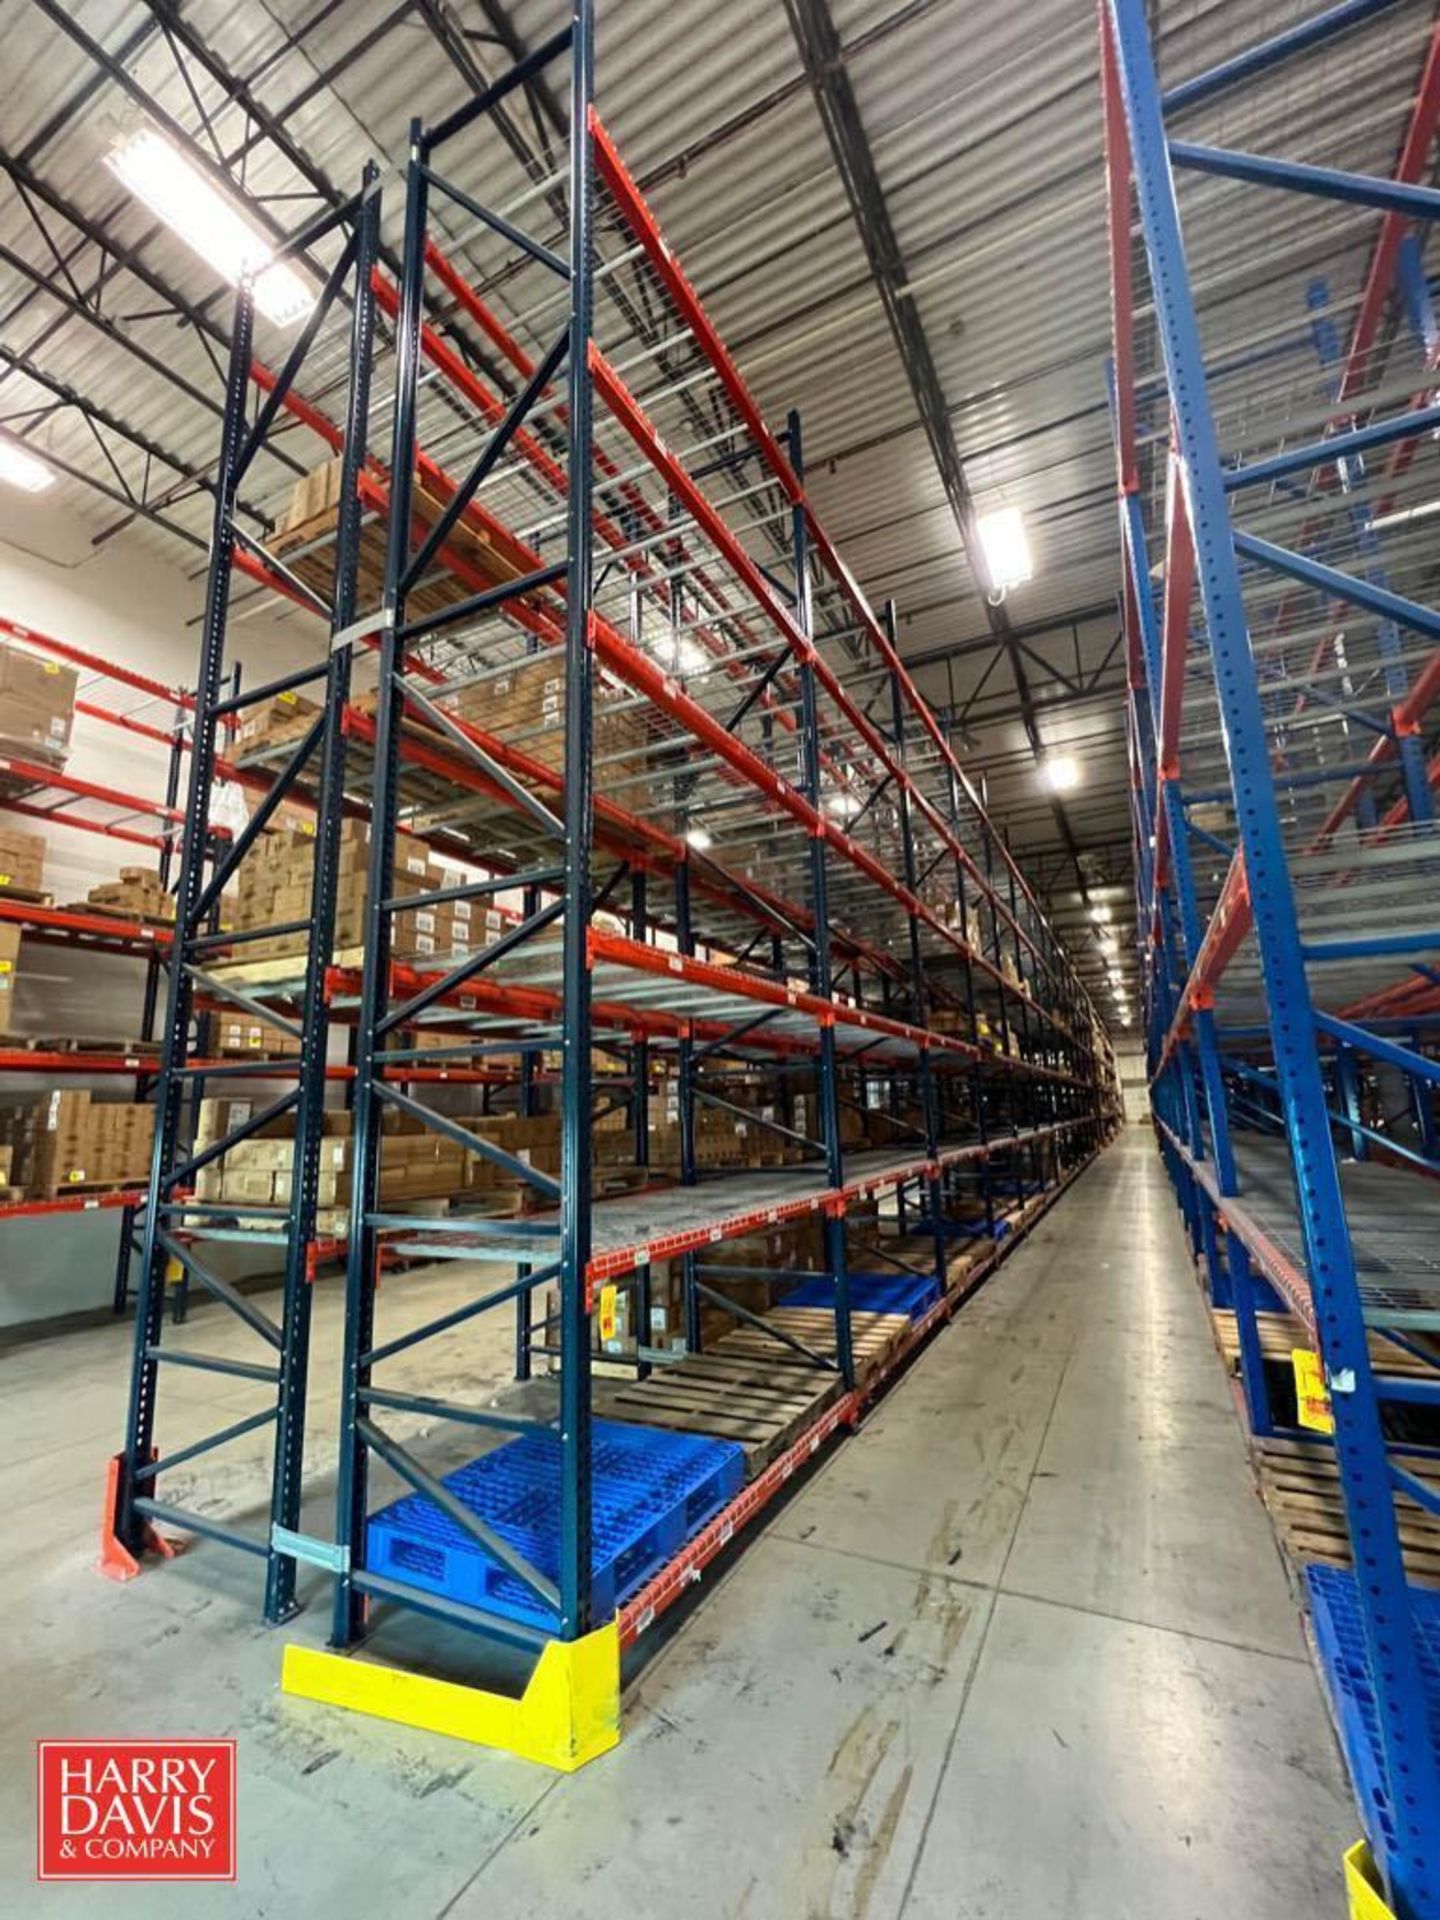 Sections Pallet Racking, Dimensions = 21' Height x 8' Width - Rigging Fee: Contact HDC - Image 2 of 2